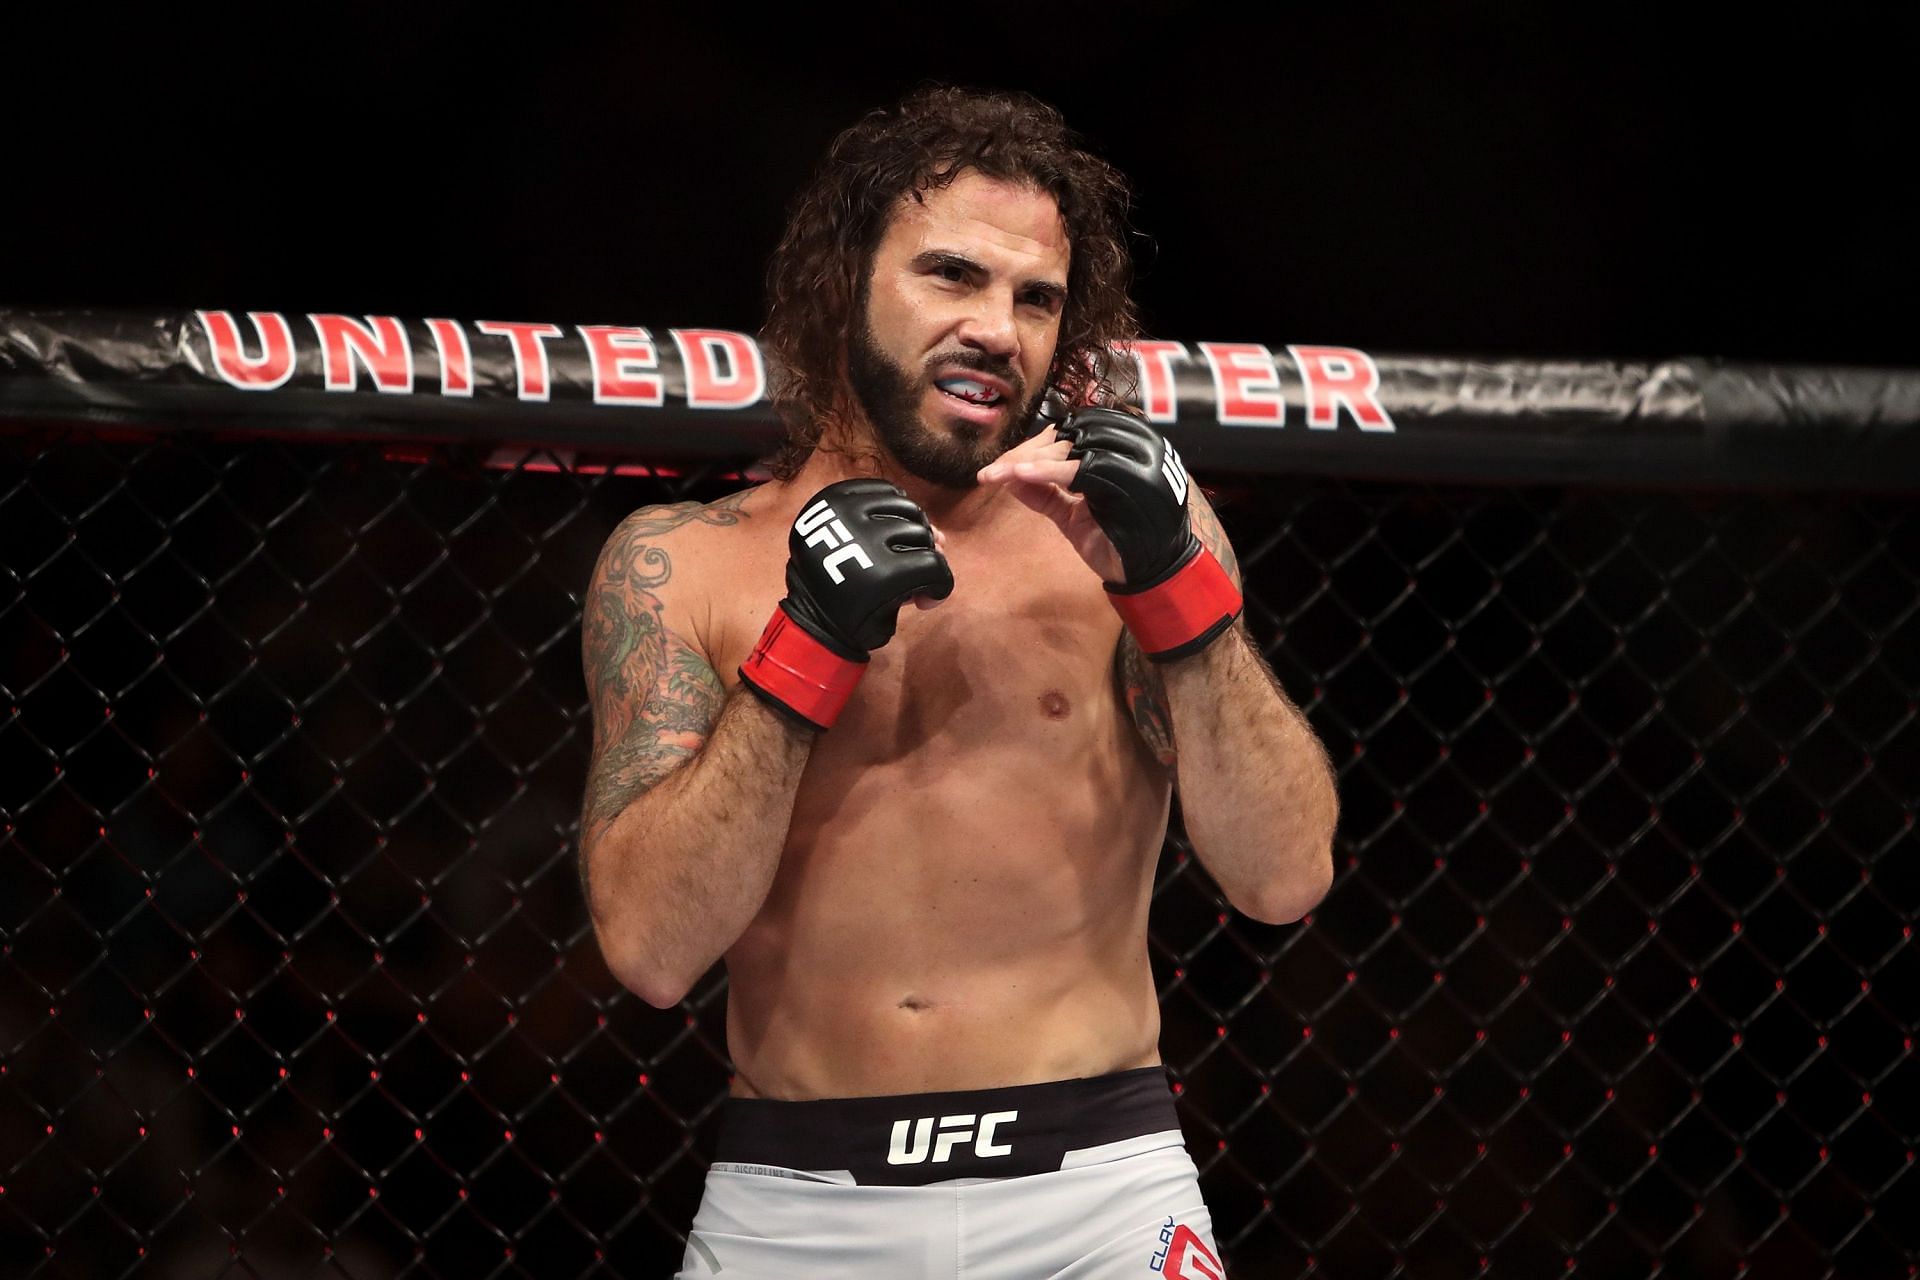 Clay Guida has been fighting in the octagon since October 2006